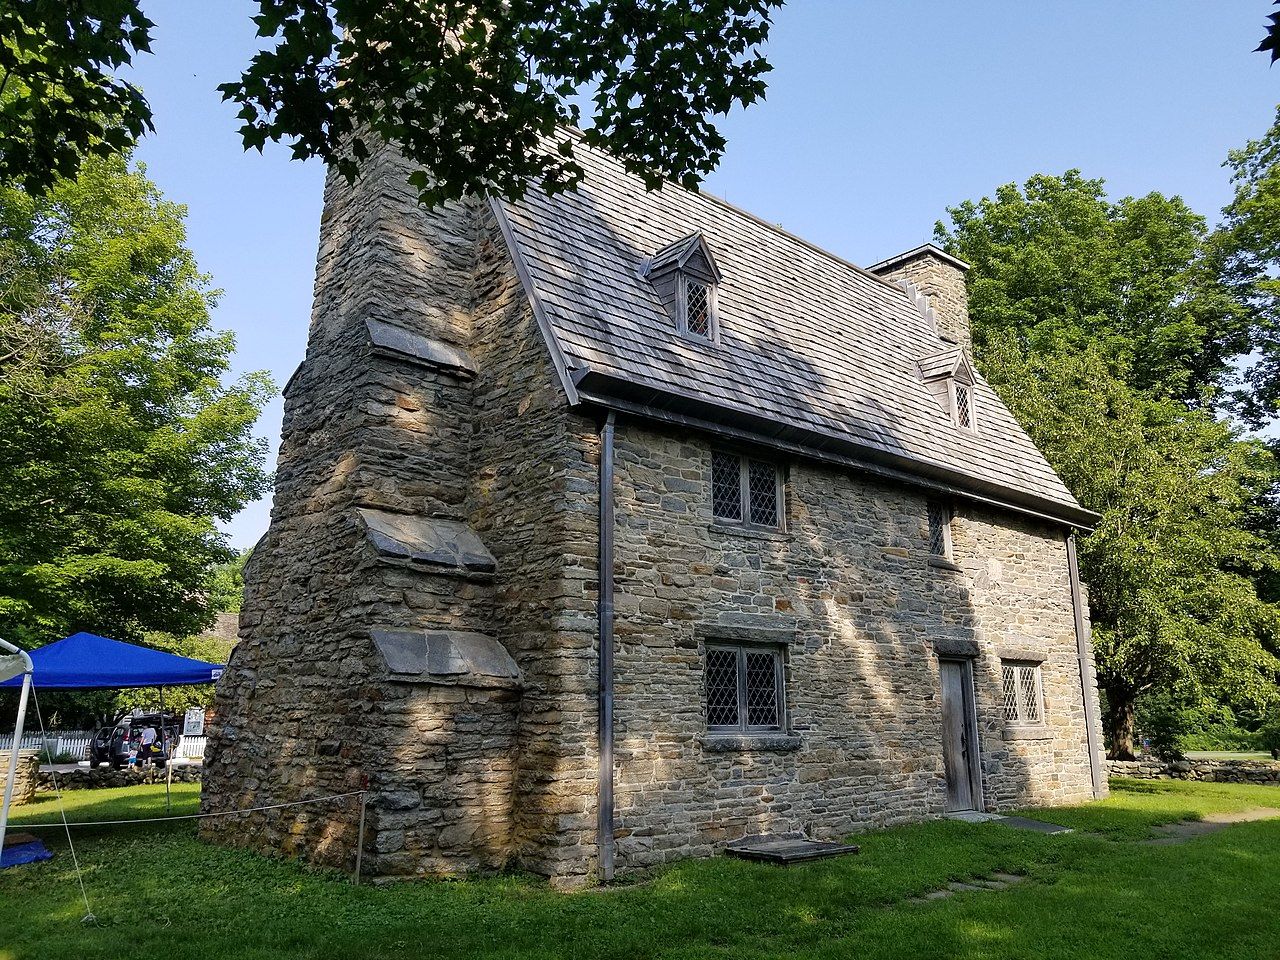 Henry Whitfield State Museum circa 1639 Oldest house in Connecticut Guilford CT USA